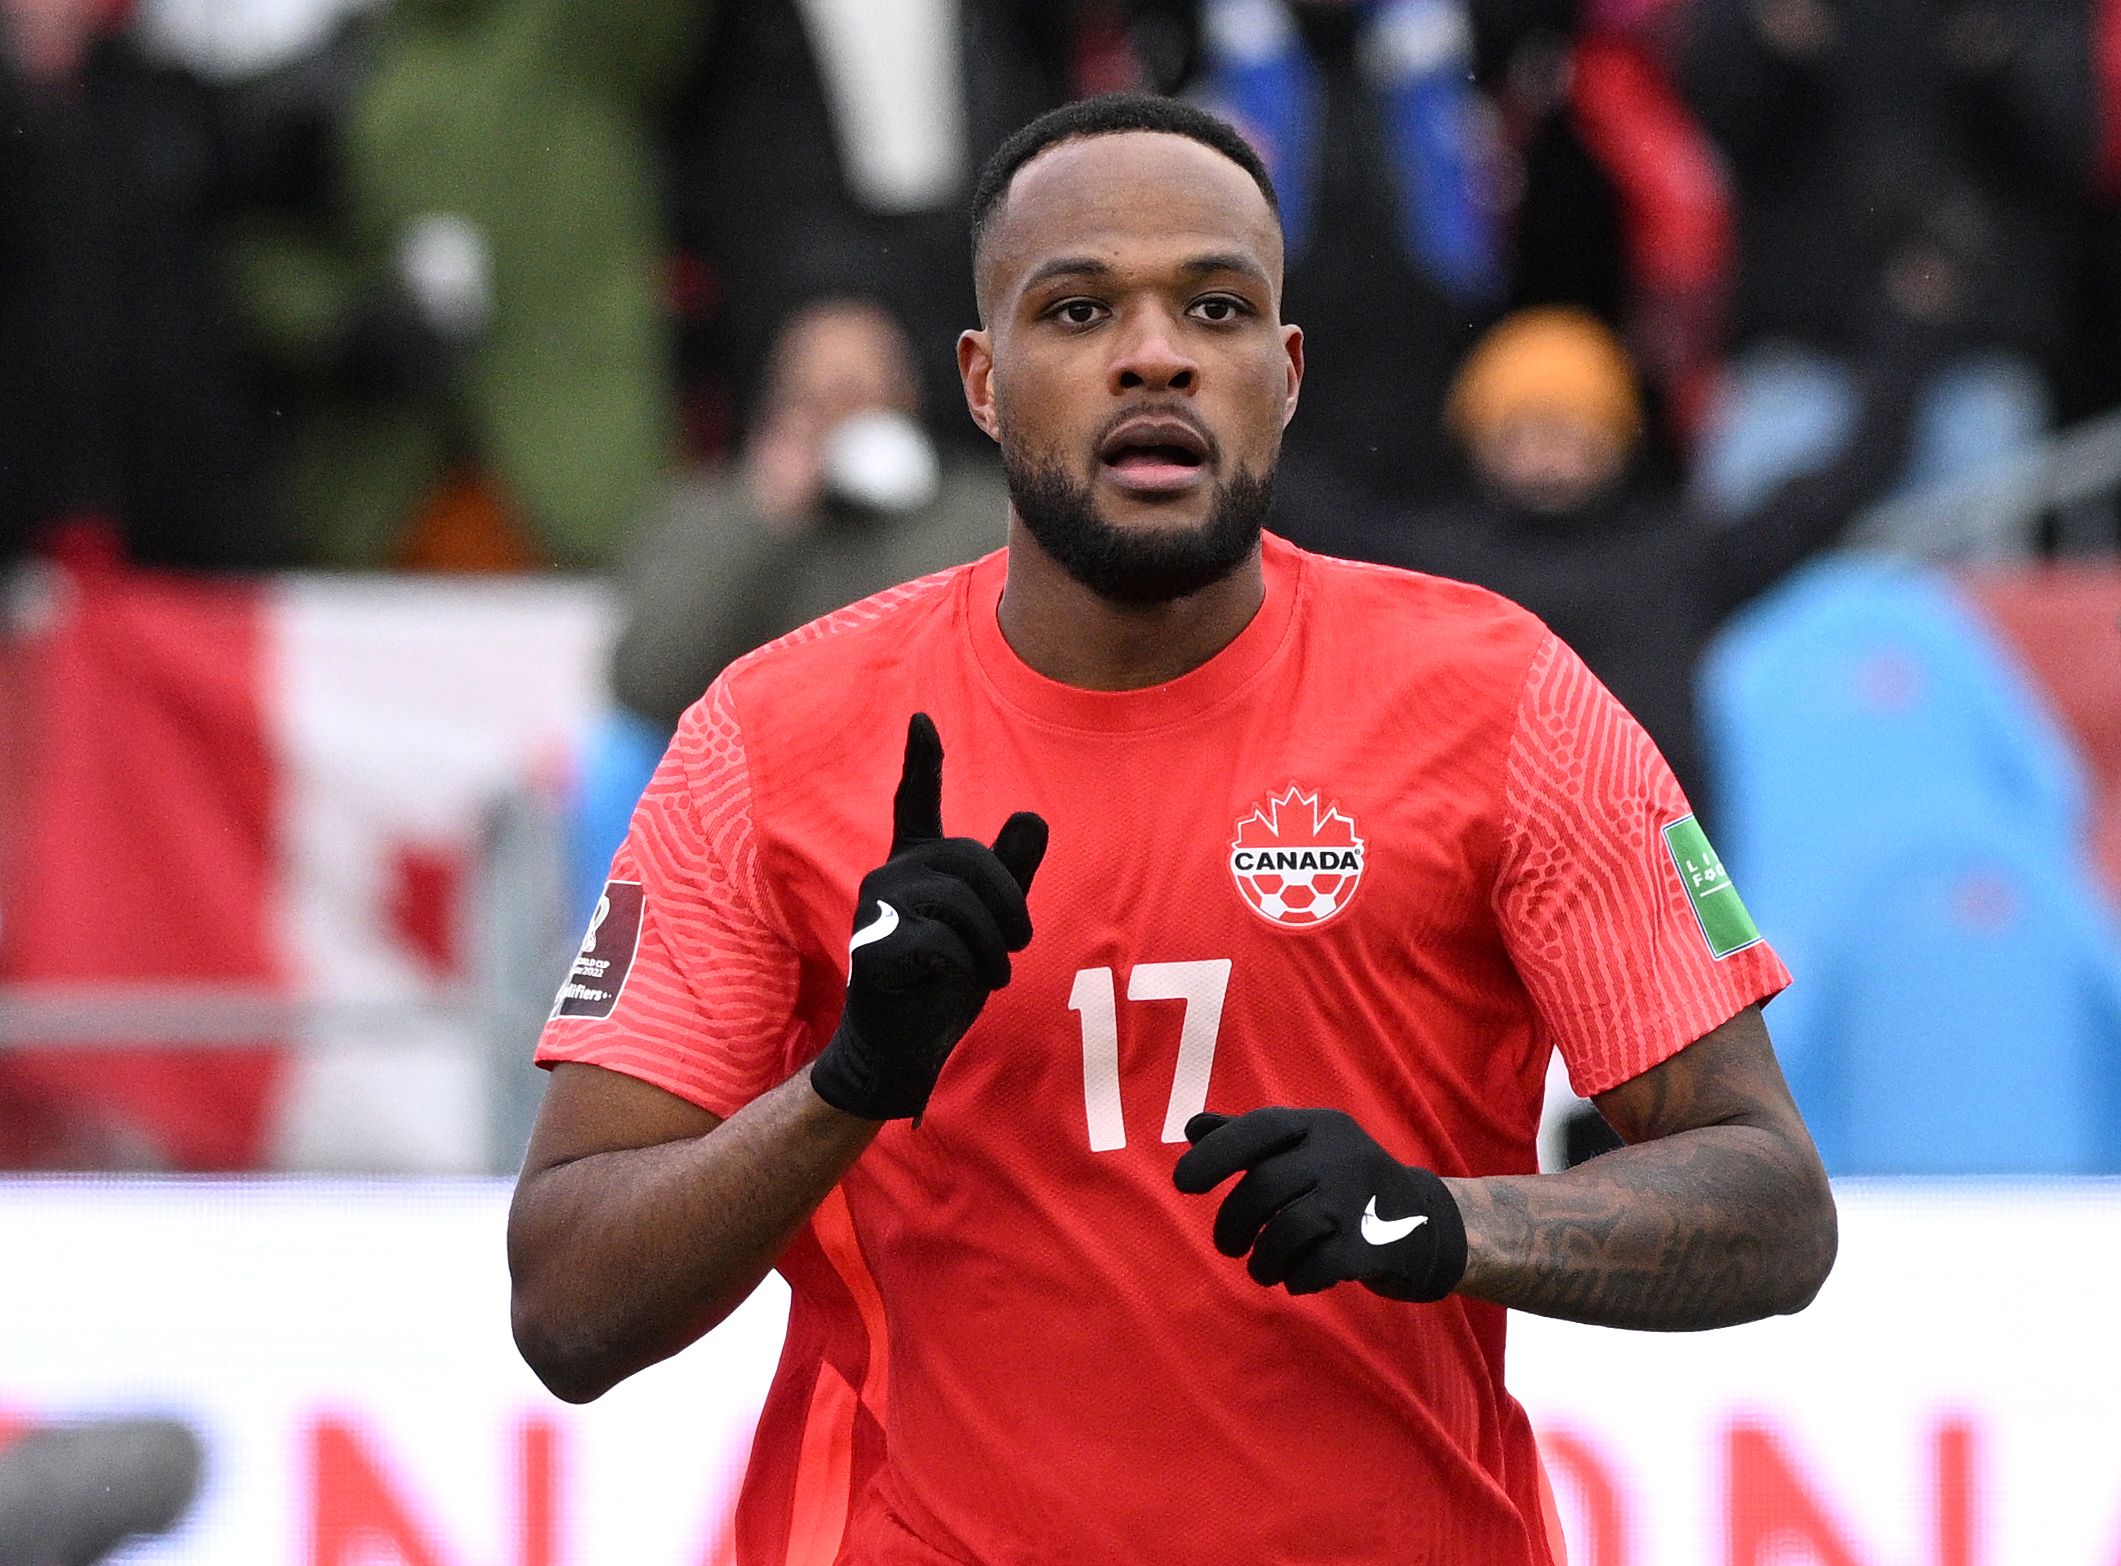 cyle-larin-besiktas-canada-nottingham-forest-transfer-news-premier-league-steve-cooper-latestMar 27, 2022; Toronto, Ontario, CAN;  Canada forward Cyle Larin (17) gestures as he celebrates scoring a goal against Jamaica in the first half of a FIFA World Cup qualifying soccer match at BMO Field. Mandatory Credit: Dan Hamilton-USA TODAY Sports